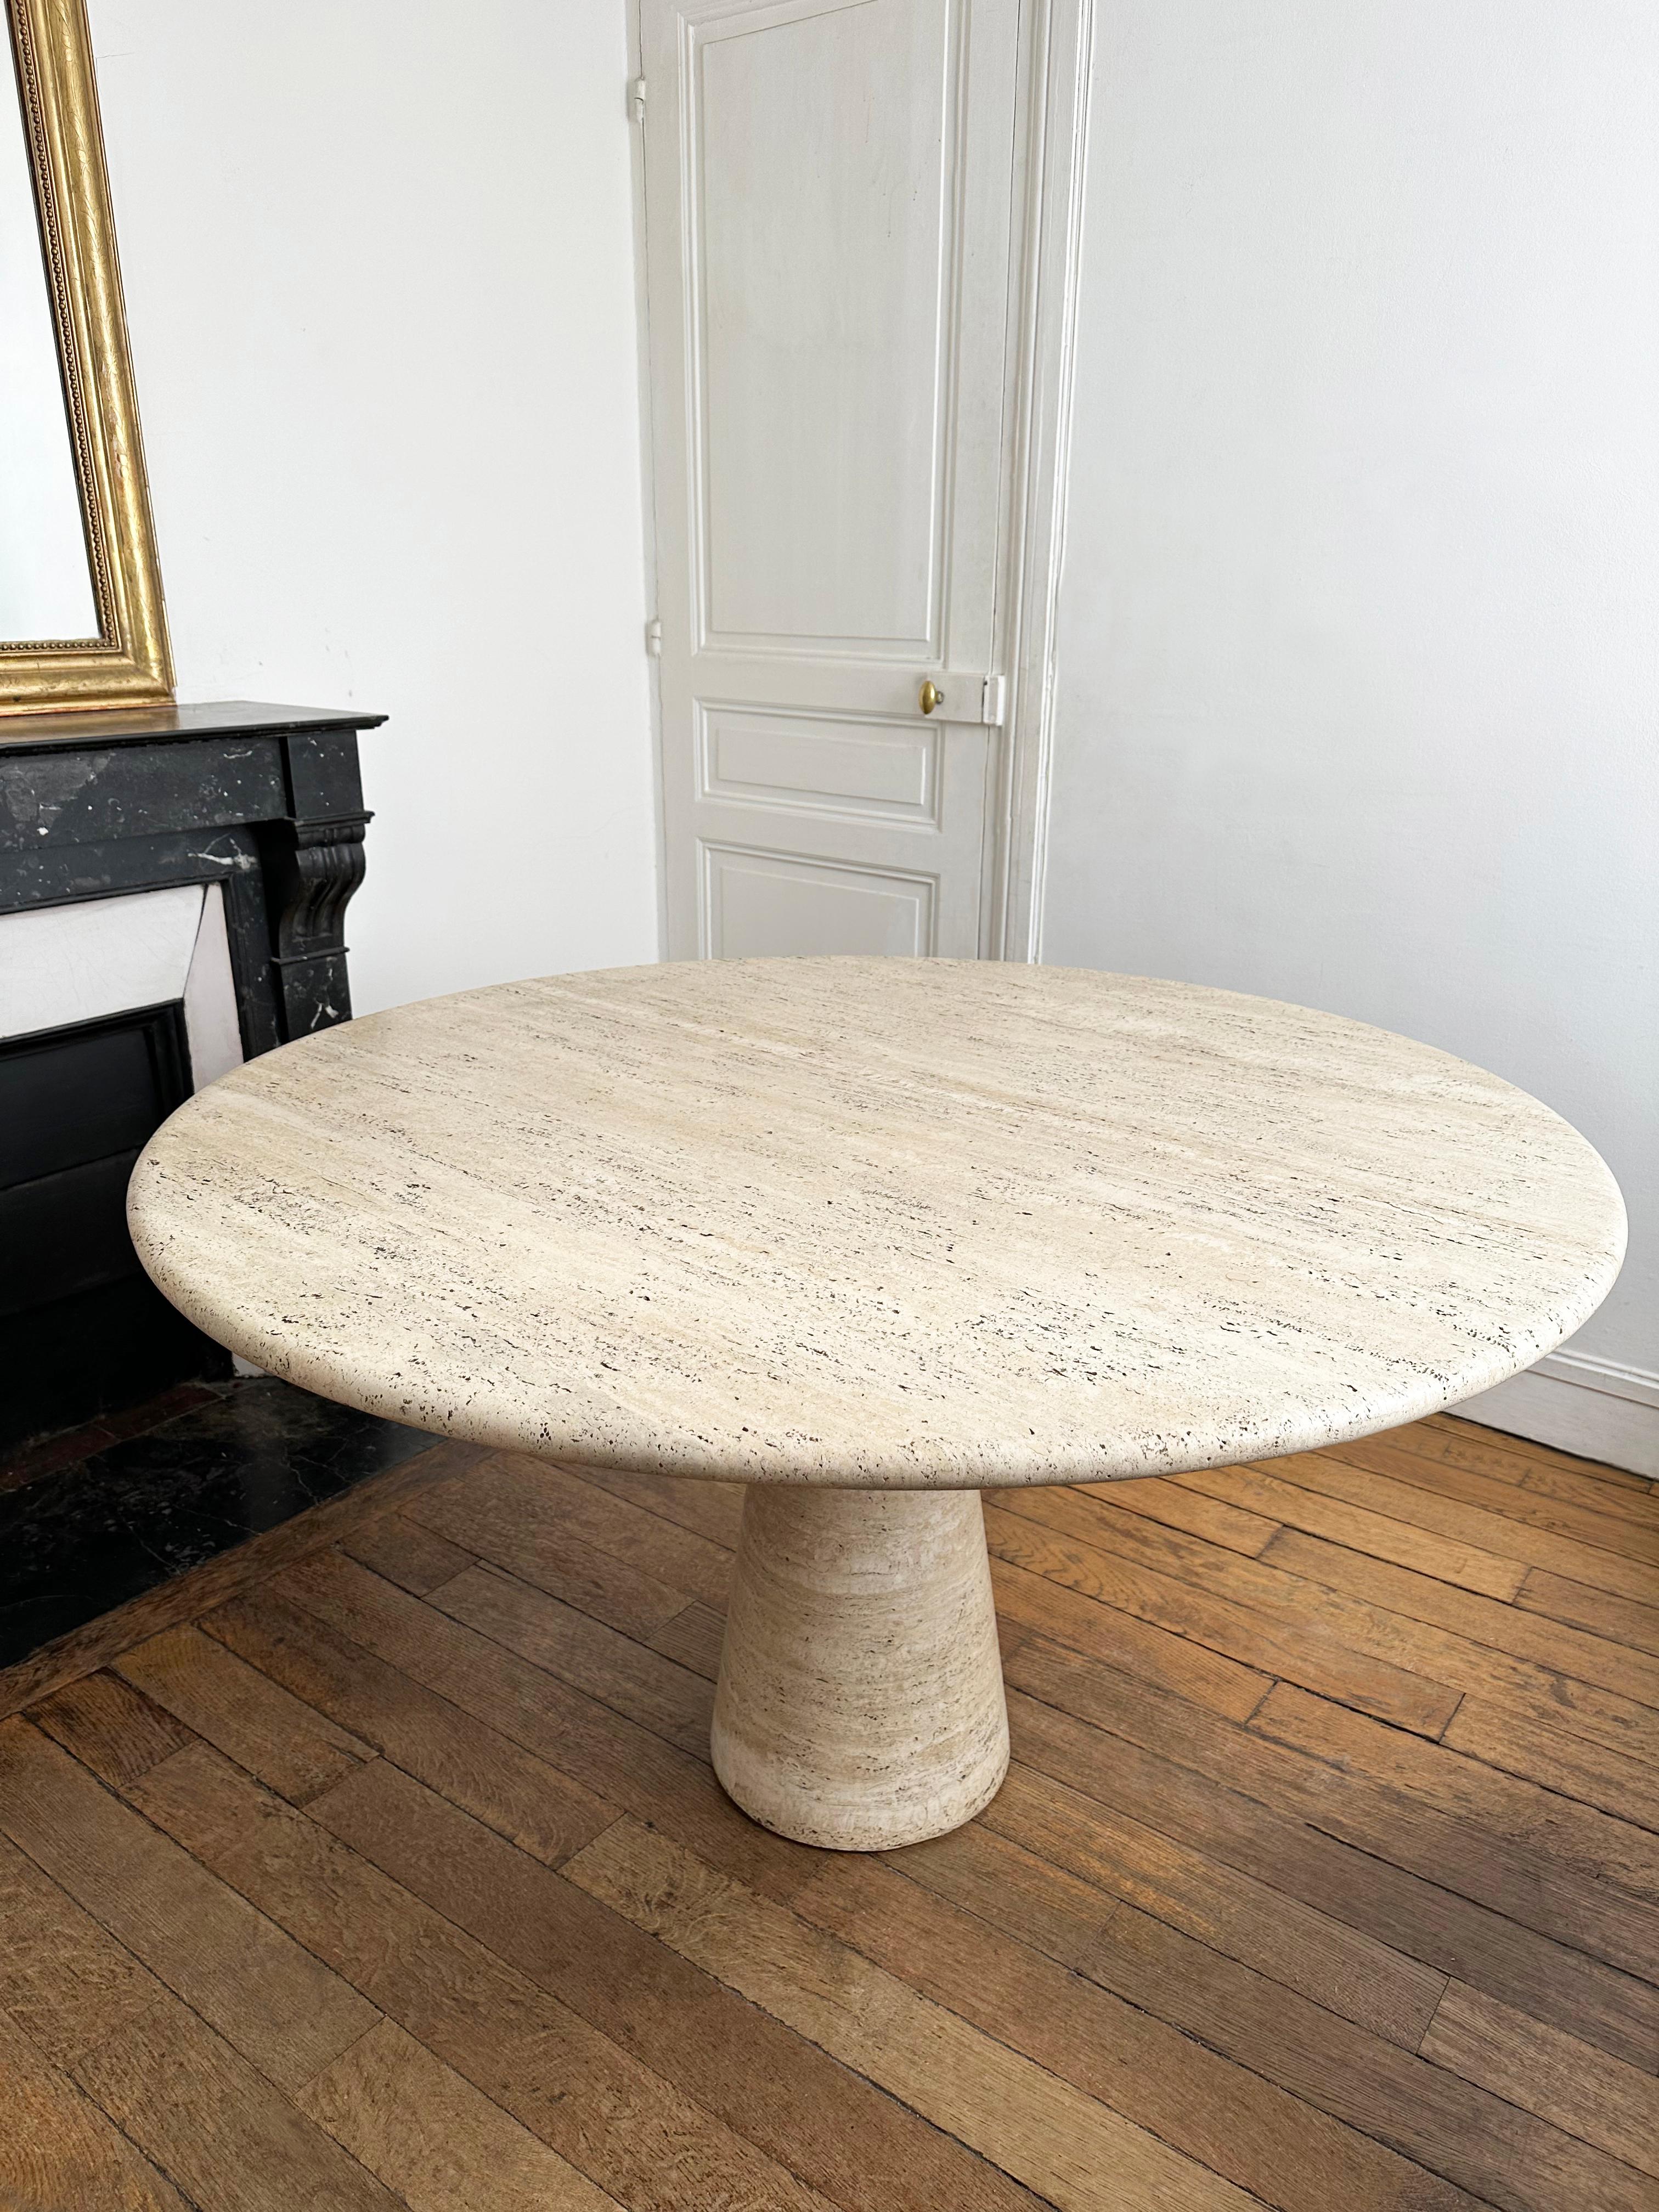 Large round table suitable as a dining table for 4-6 seats or as a center piece table in an entrance or foyer. 
Made from solid travertine with a 3cm thick tabletop with filleted edge, this table features a single conical pedestal structure, also